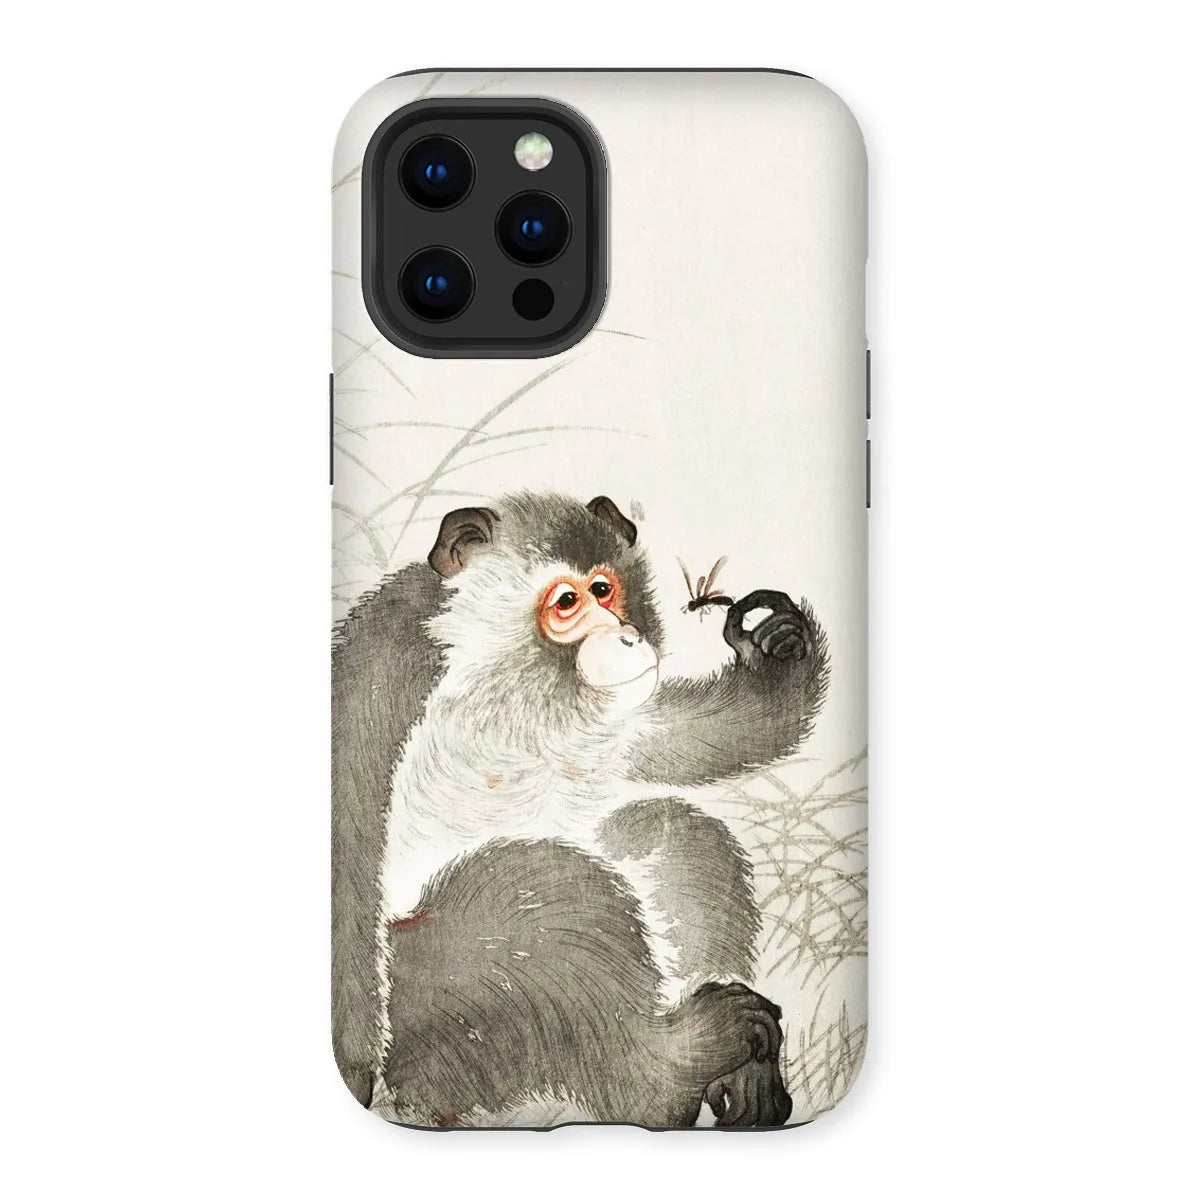 Monkey With Insect - Shin-hanga Art Phone Case - Ohara Koson - Iphone 13 Pro Max / Matte - Mobile Phone Cases